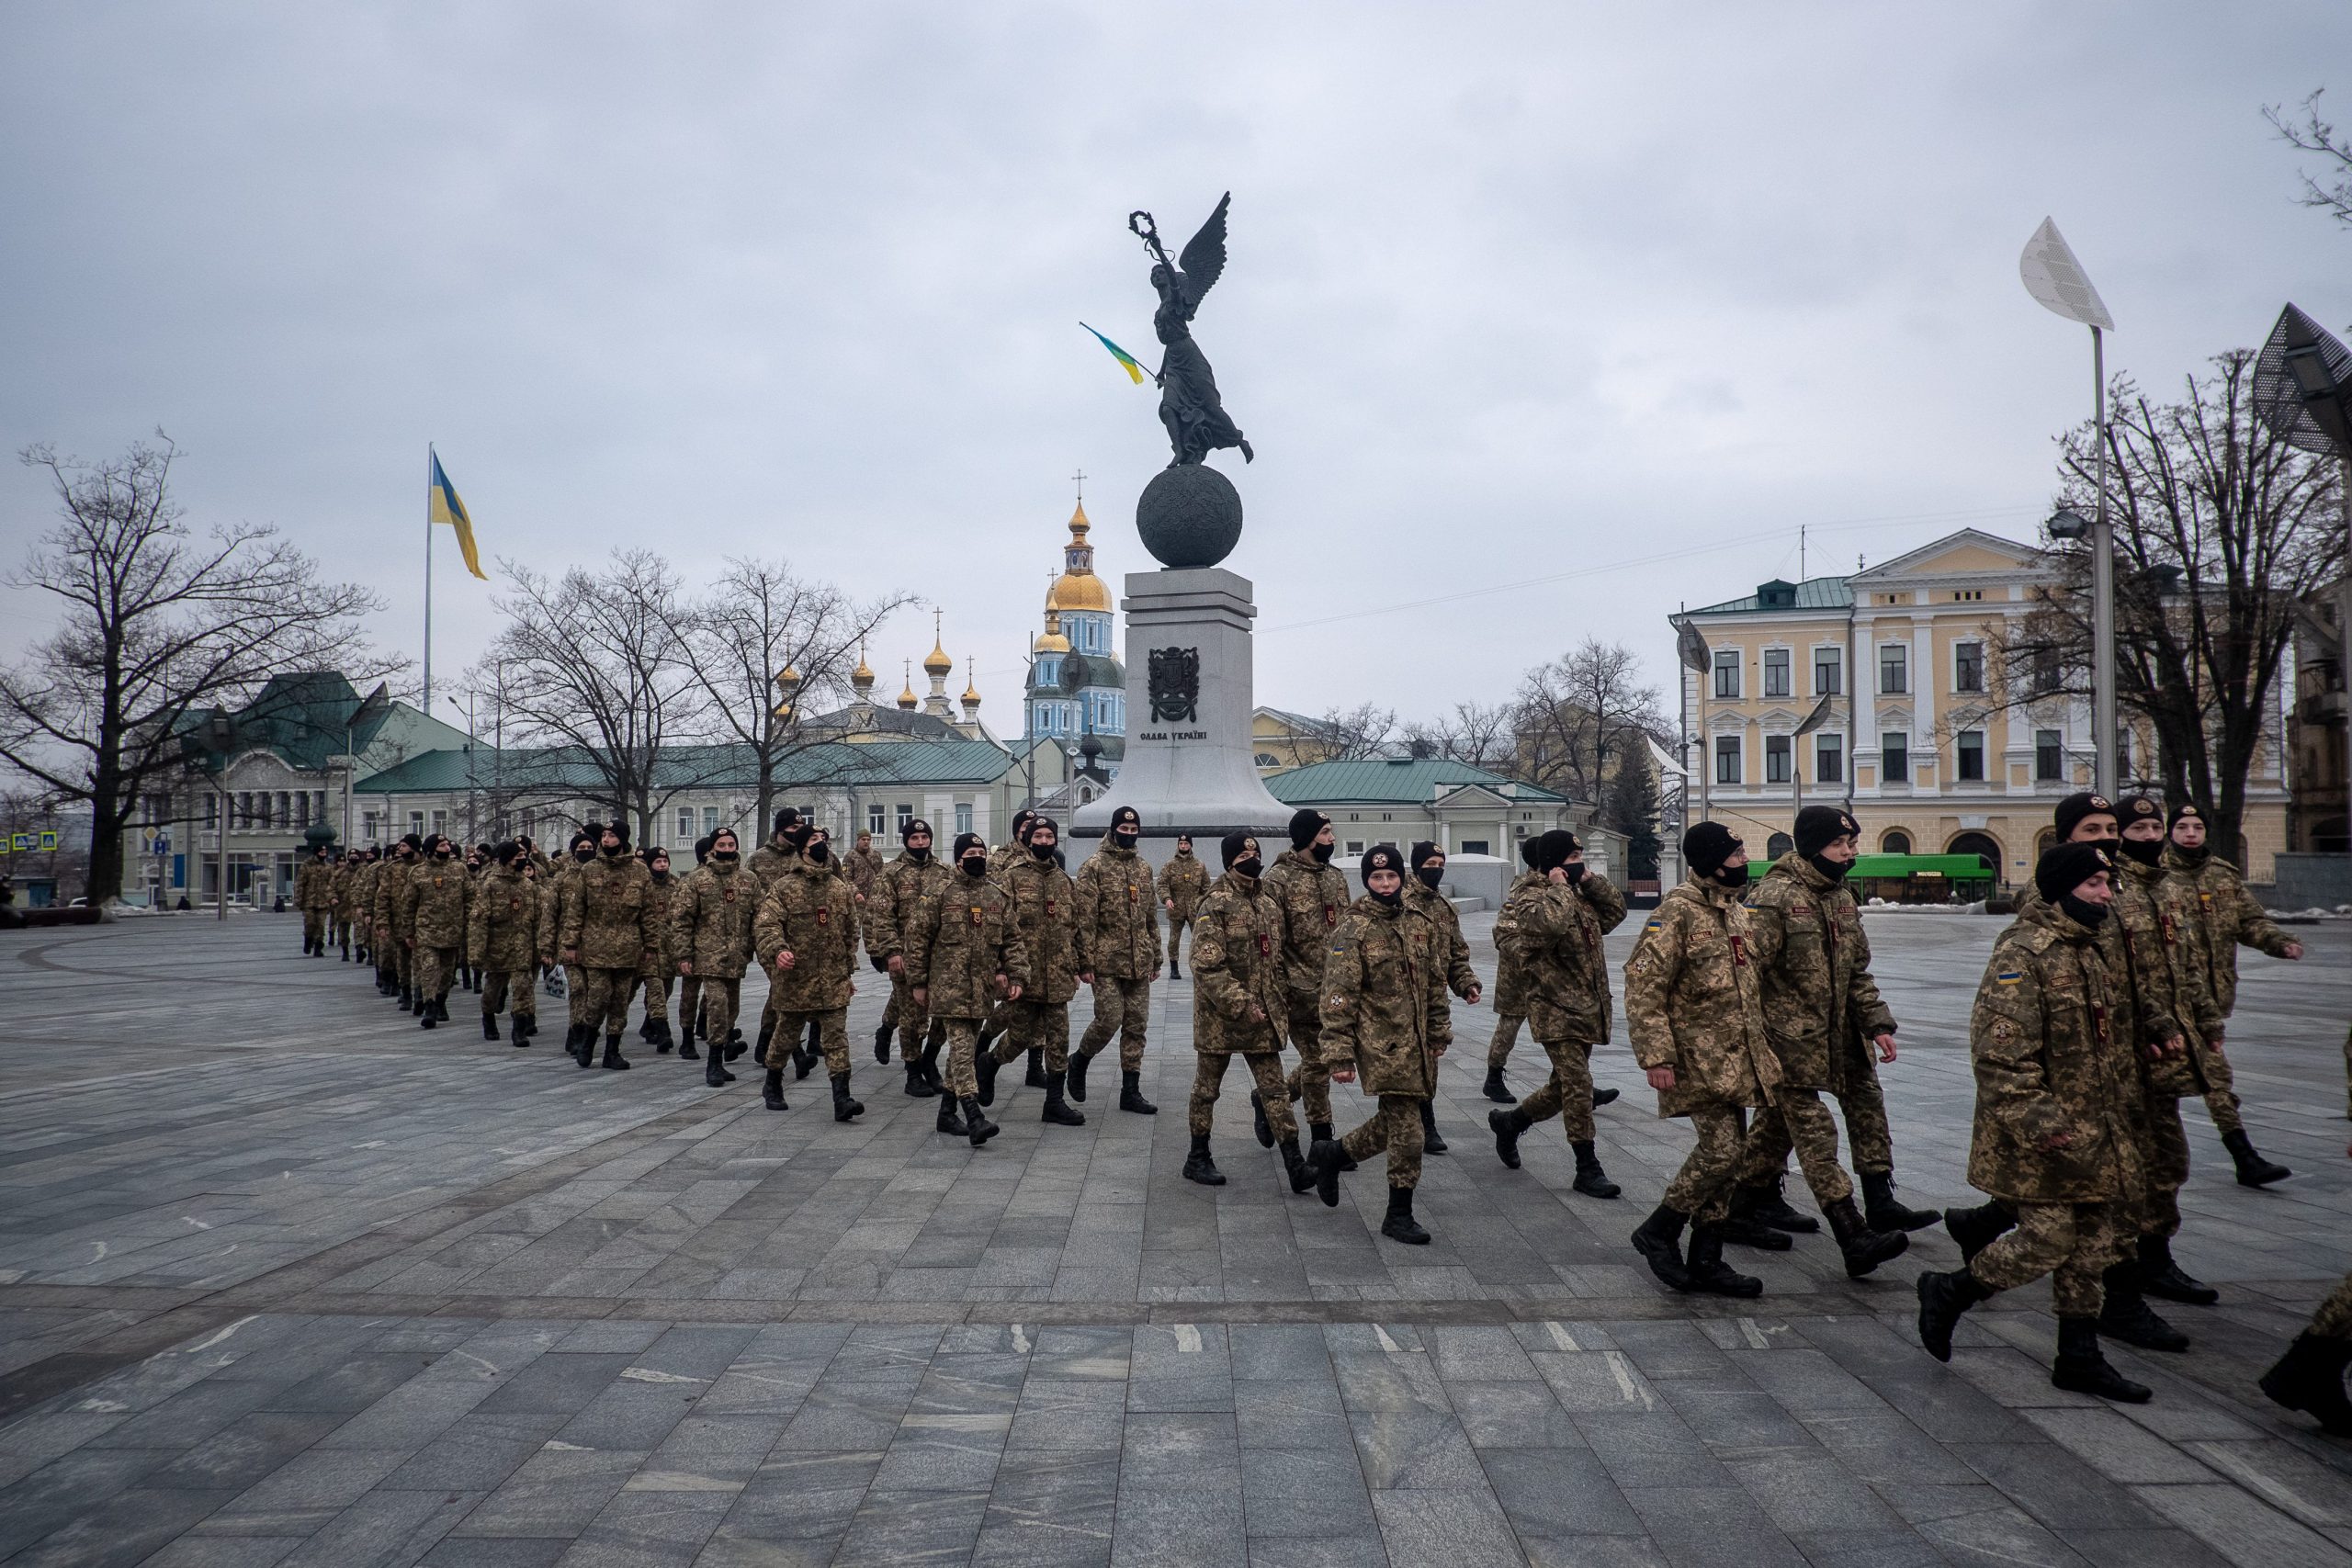 Ukrainian military cadets walk through a Ukrainian city, with a monument and a church seen in the background.